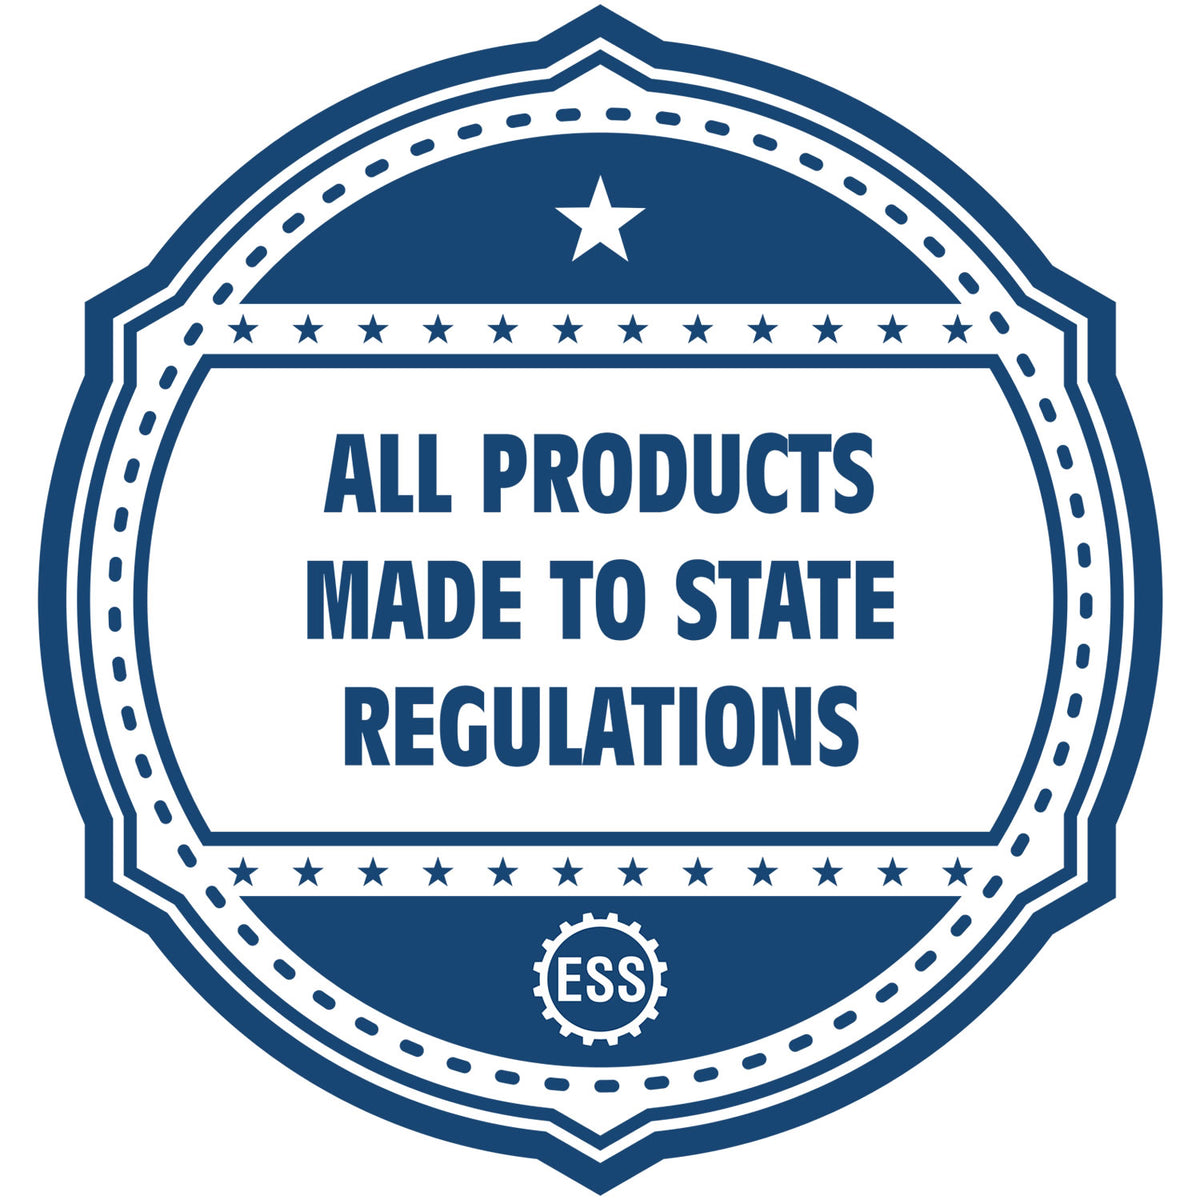 A blue icon or badge for the Hybrid Illinois Landscape Architect Seal showing that this product is made in compliance with state regulations.